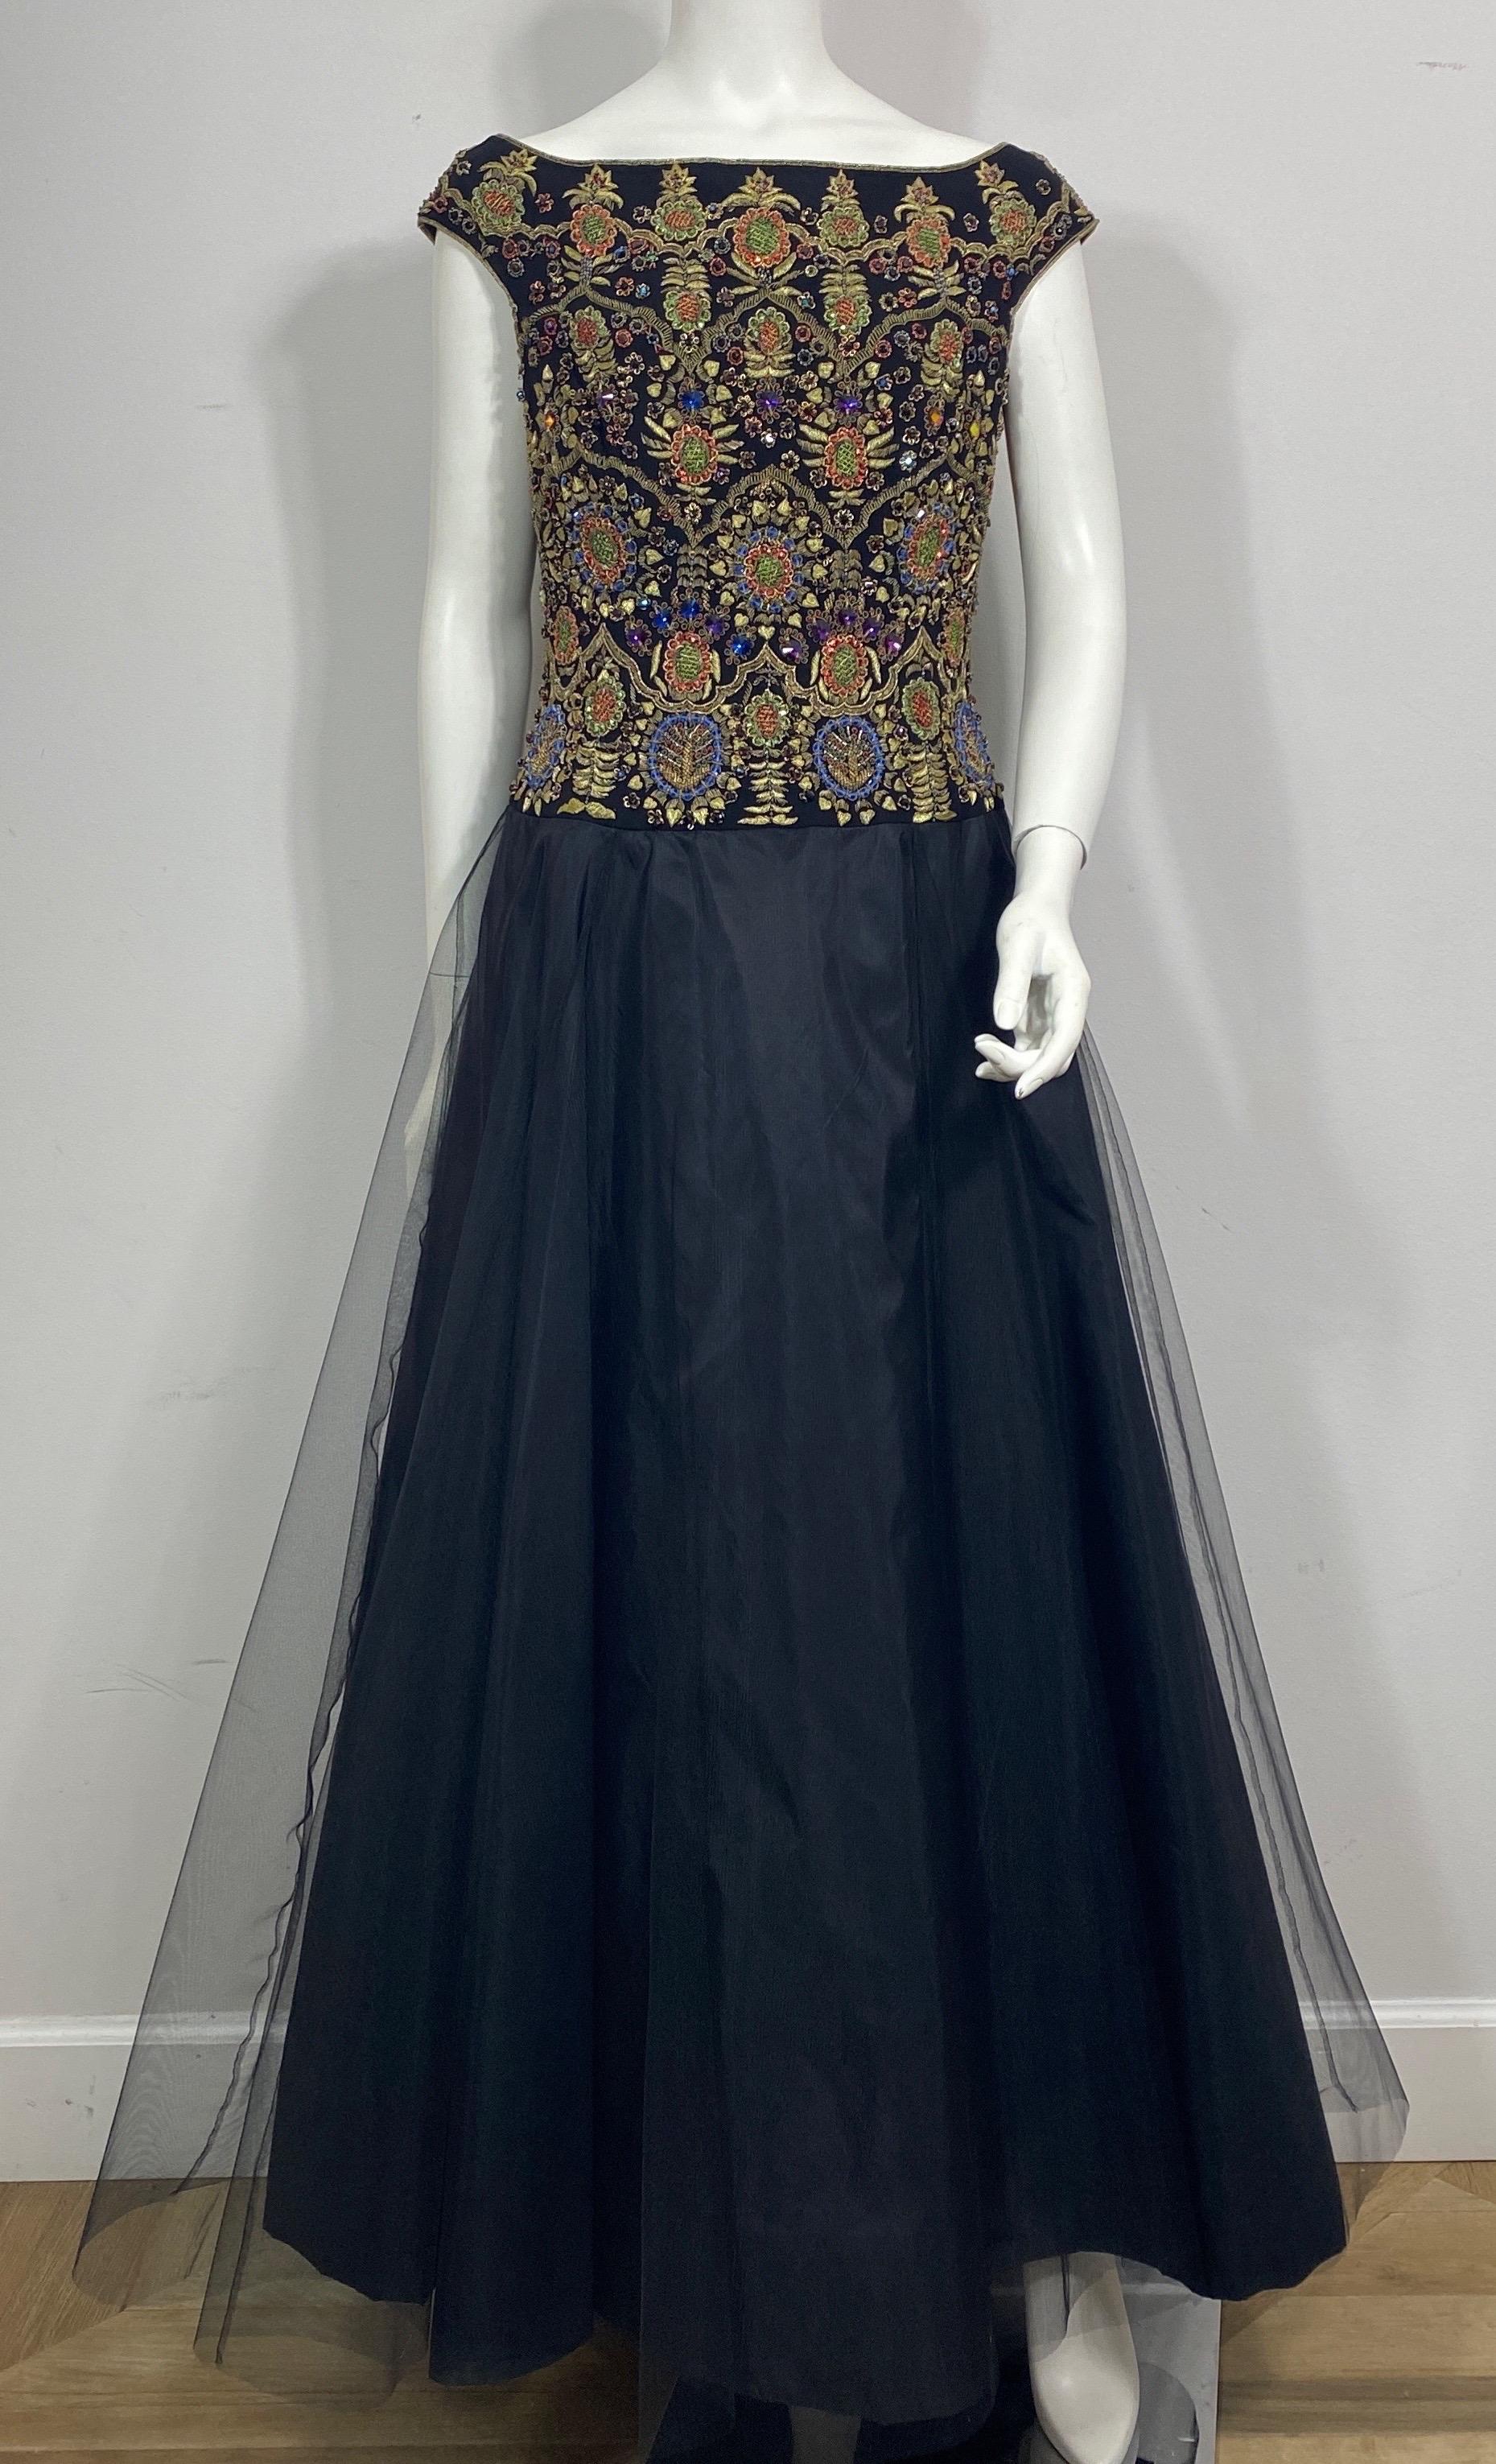 Escada Black Silk Sleeveless Gown w/ Multi Colored Beaded Bodice and a multi layer tulle skirt is a size 38.  This 1990’s striking gown is in excellent condition.  It features a gorgeous black silk material, intricate multi colored beaded, gemstone